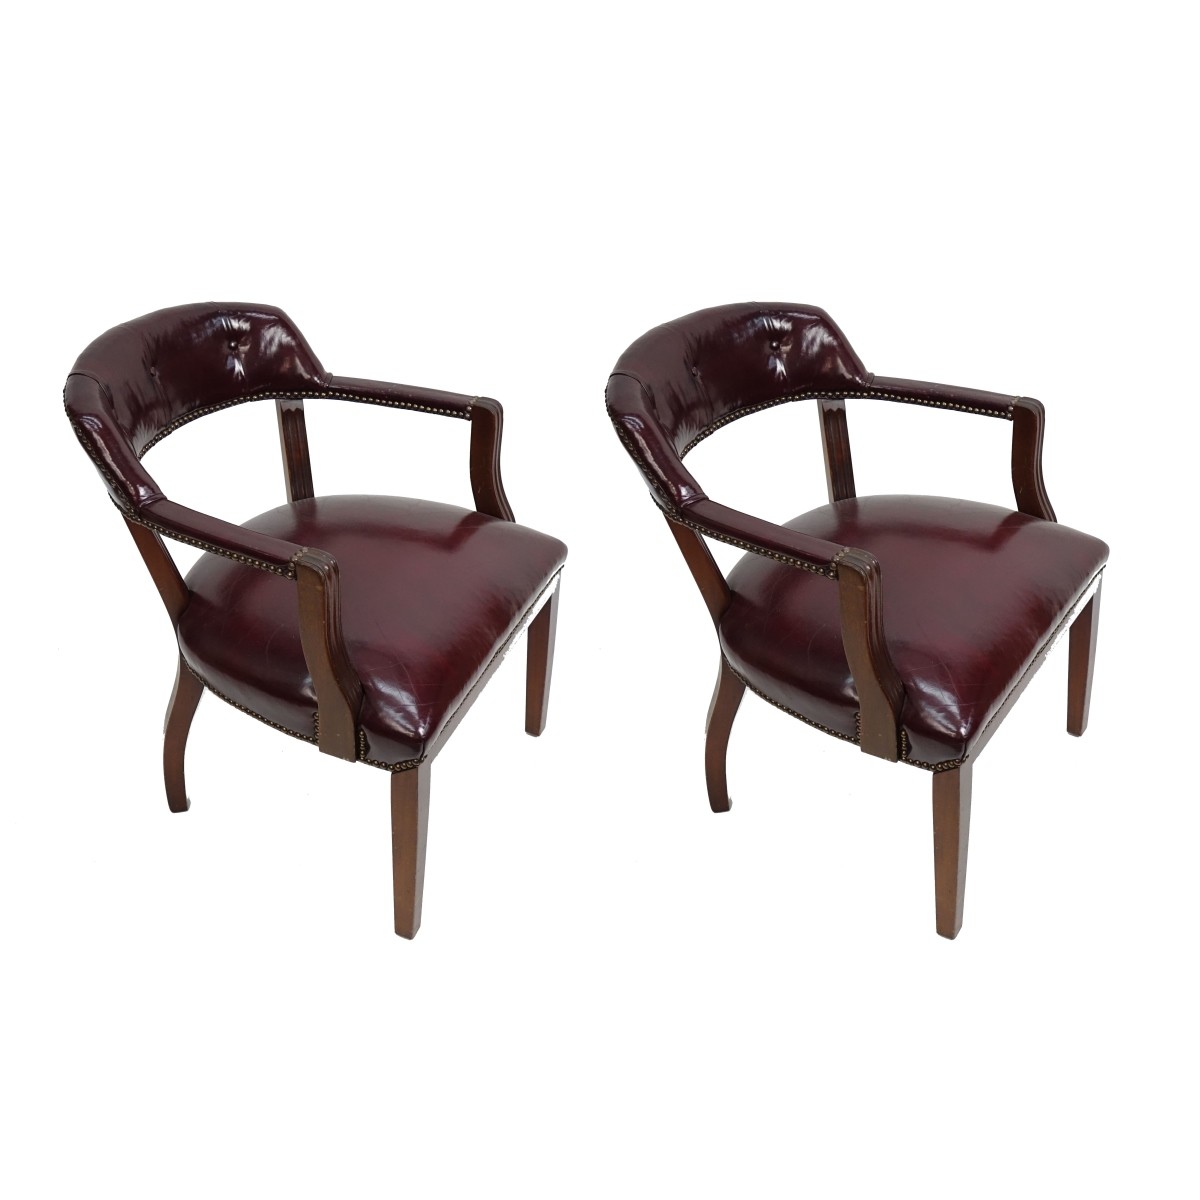 Pair of Steven's Leather Chairs